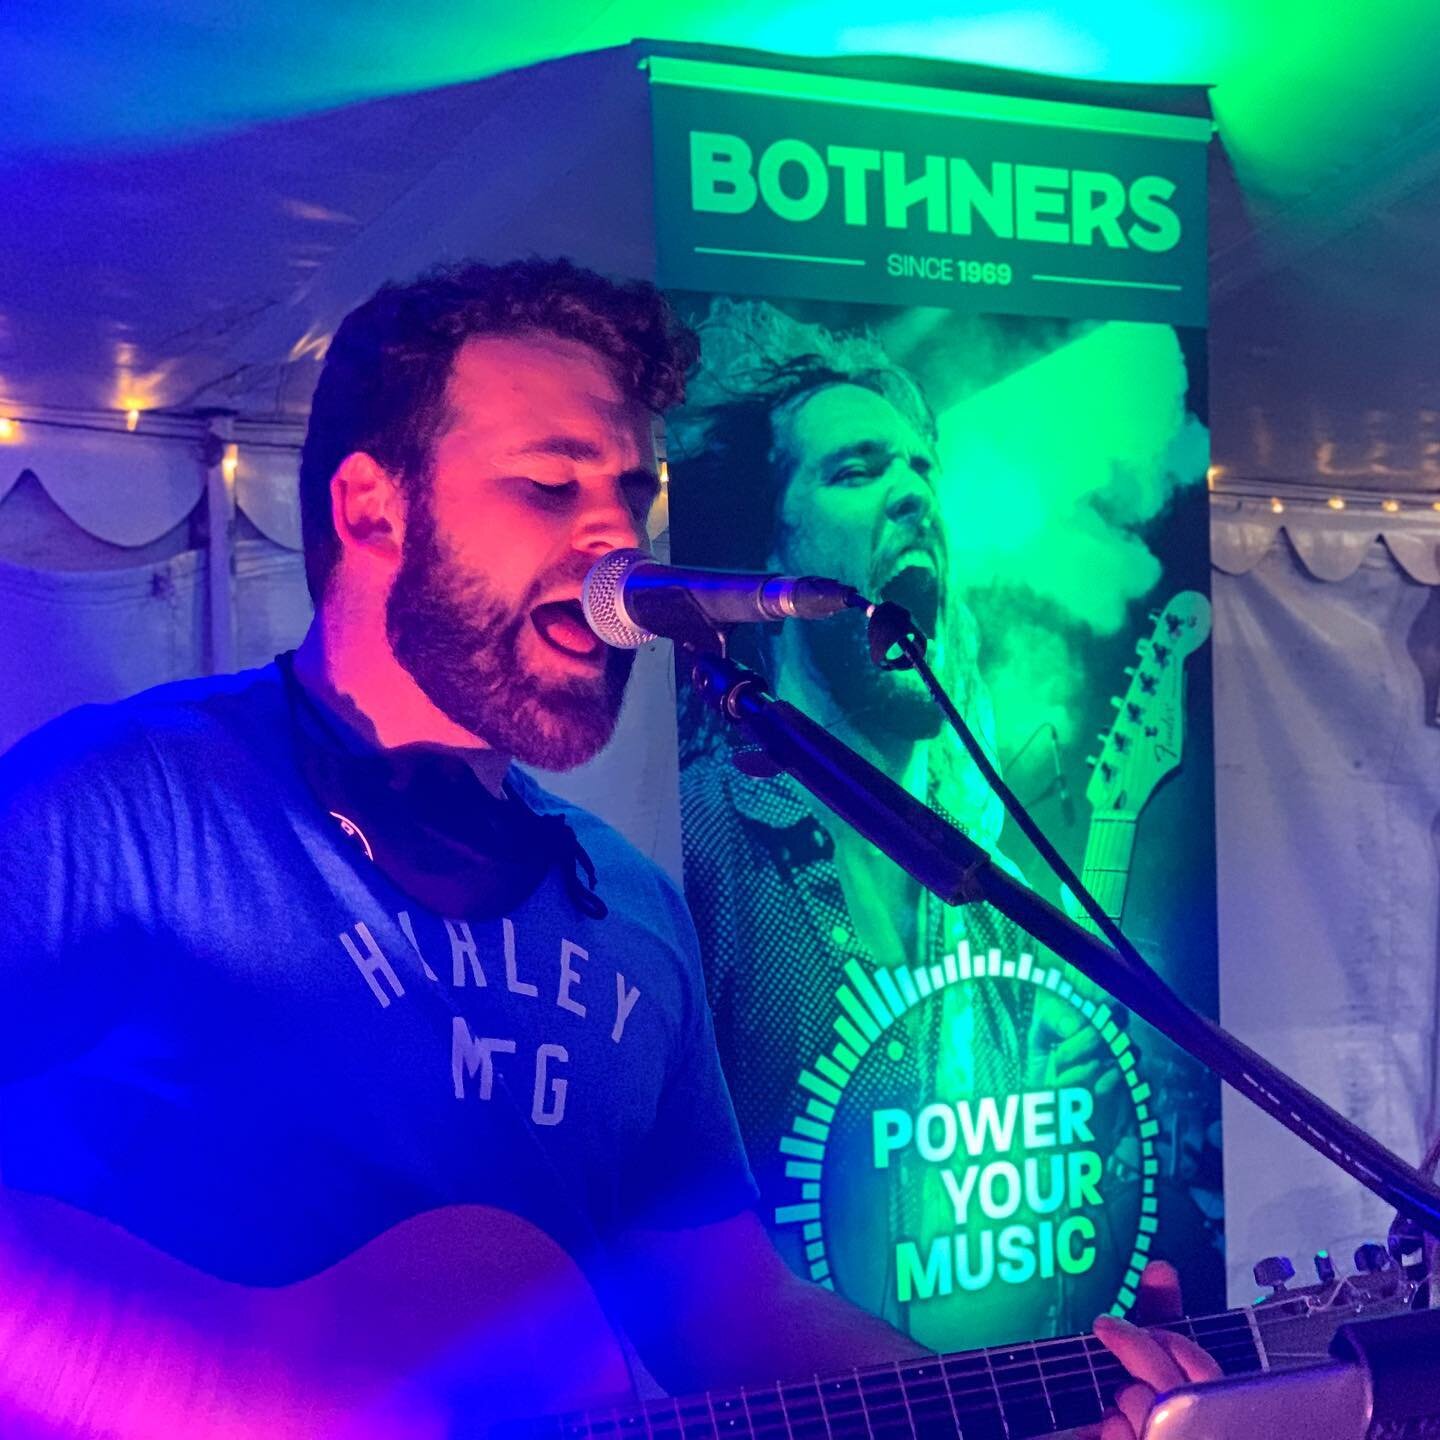 Shoutout to @bothnersmusicalinstruments for their continued support of local musicians!! You guys rock 🤘🏻 #poweryourmusic